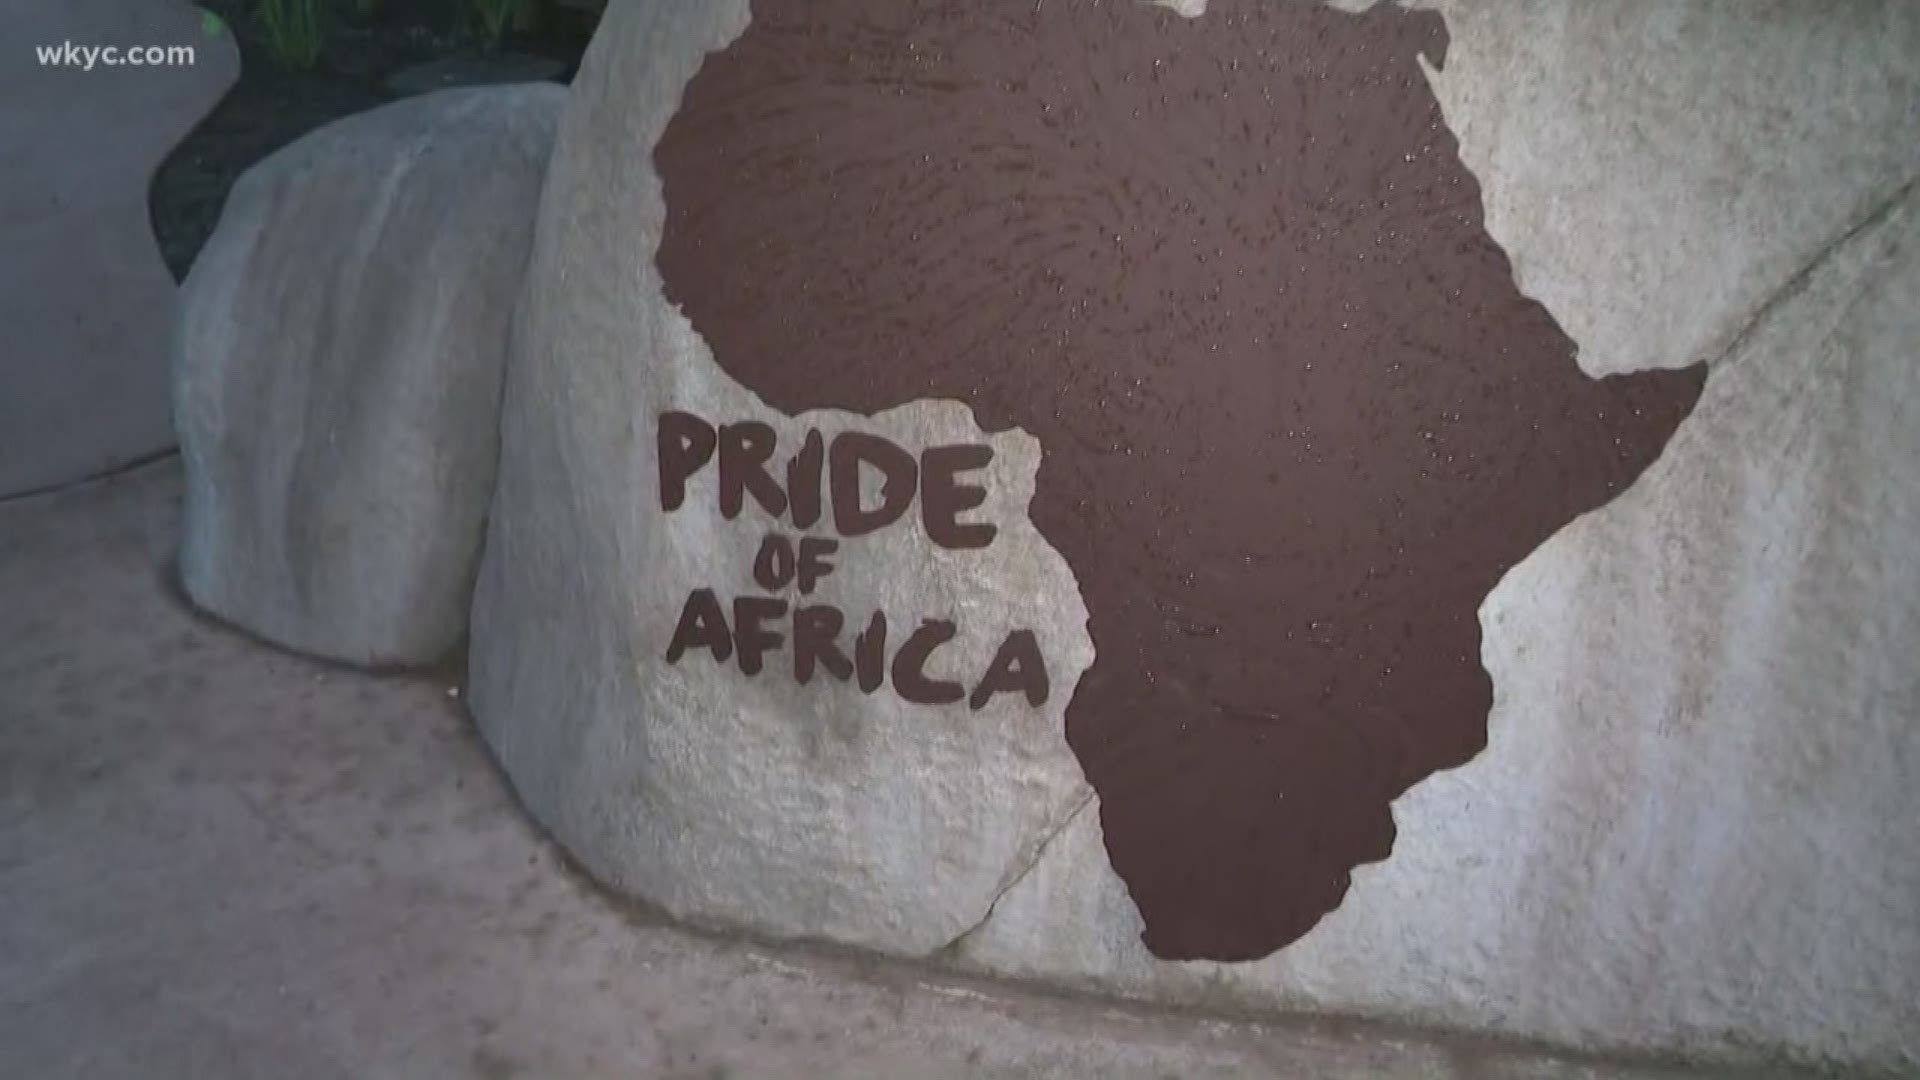 June 14, 2019: Can you hear the roar? The Akron Zoo is preparing to open their new Pride of Africa exhibit on June 29. WKYC's Jasmine Monroe was given a sneak peek at what you can expect.